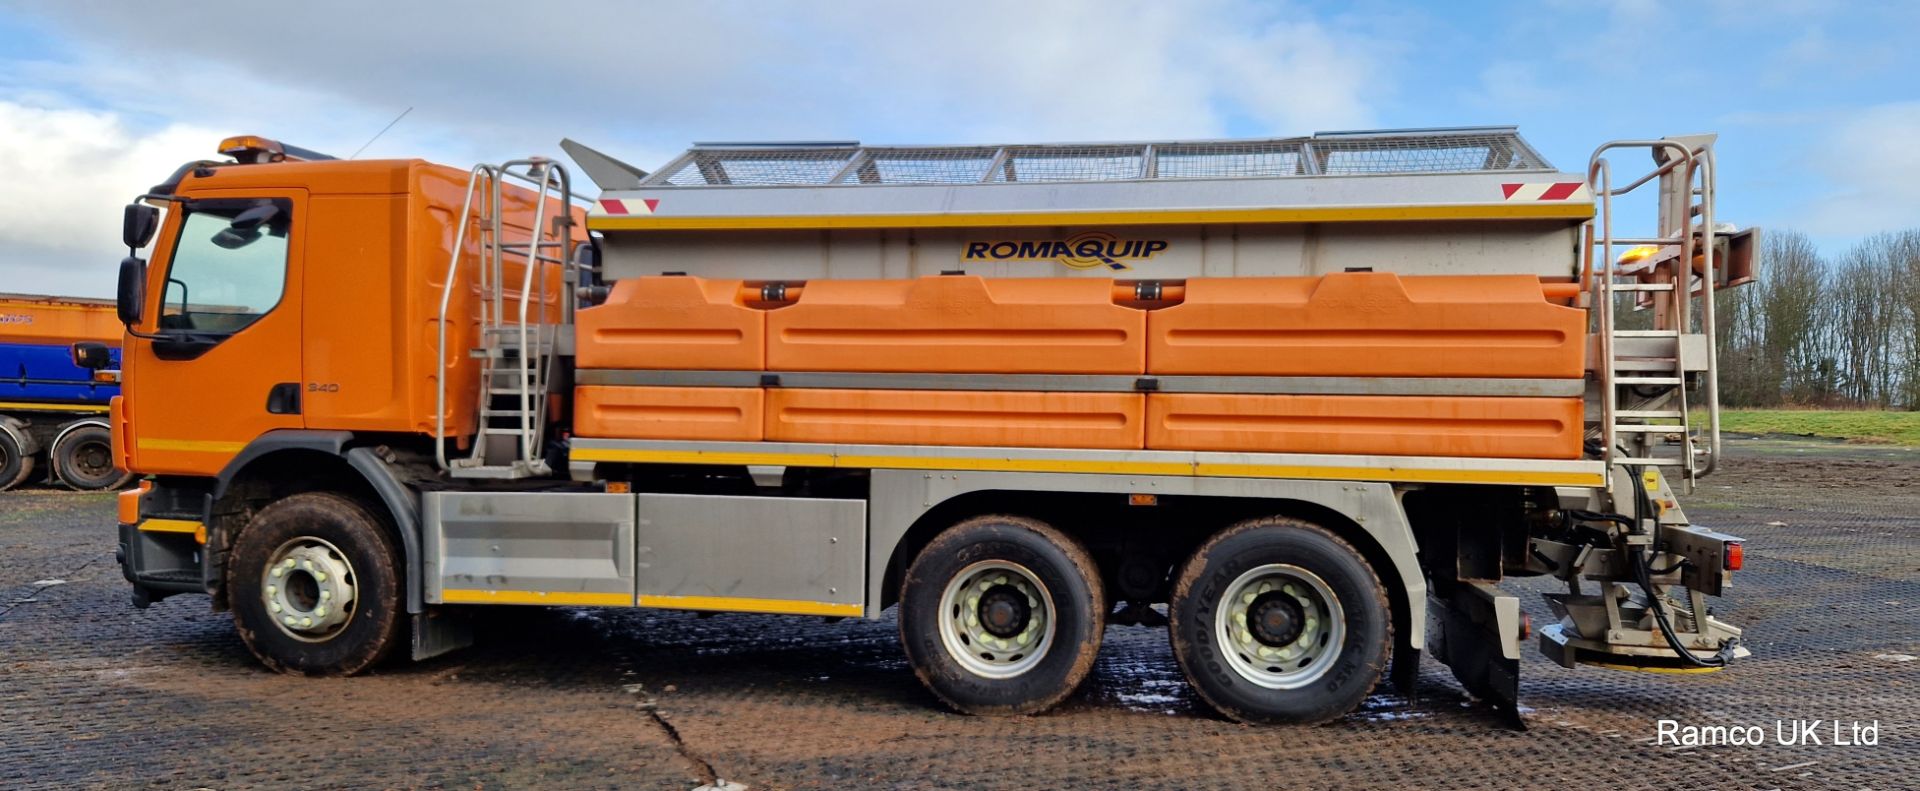 2010 (reg KN10 EDL) Volvo FE 340 6x4 with Romaquip wet gritter mount. - Image 10 of 20